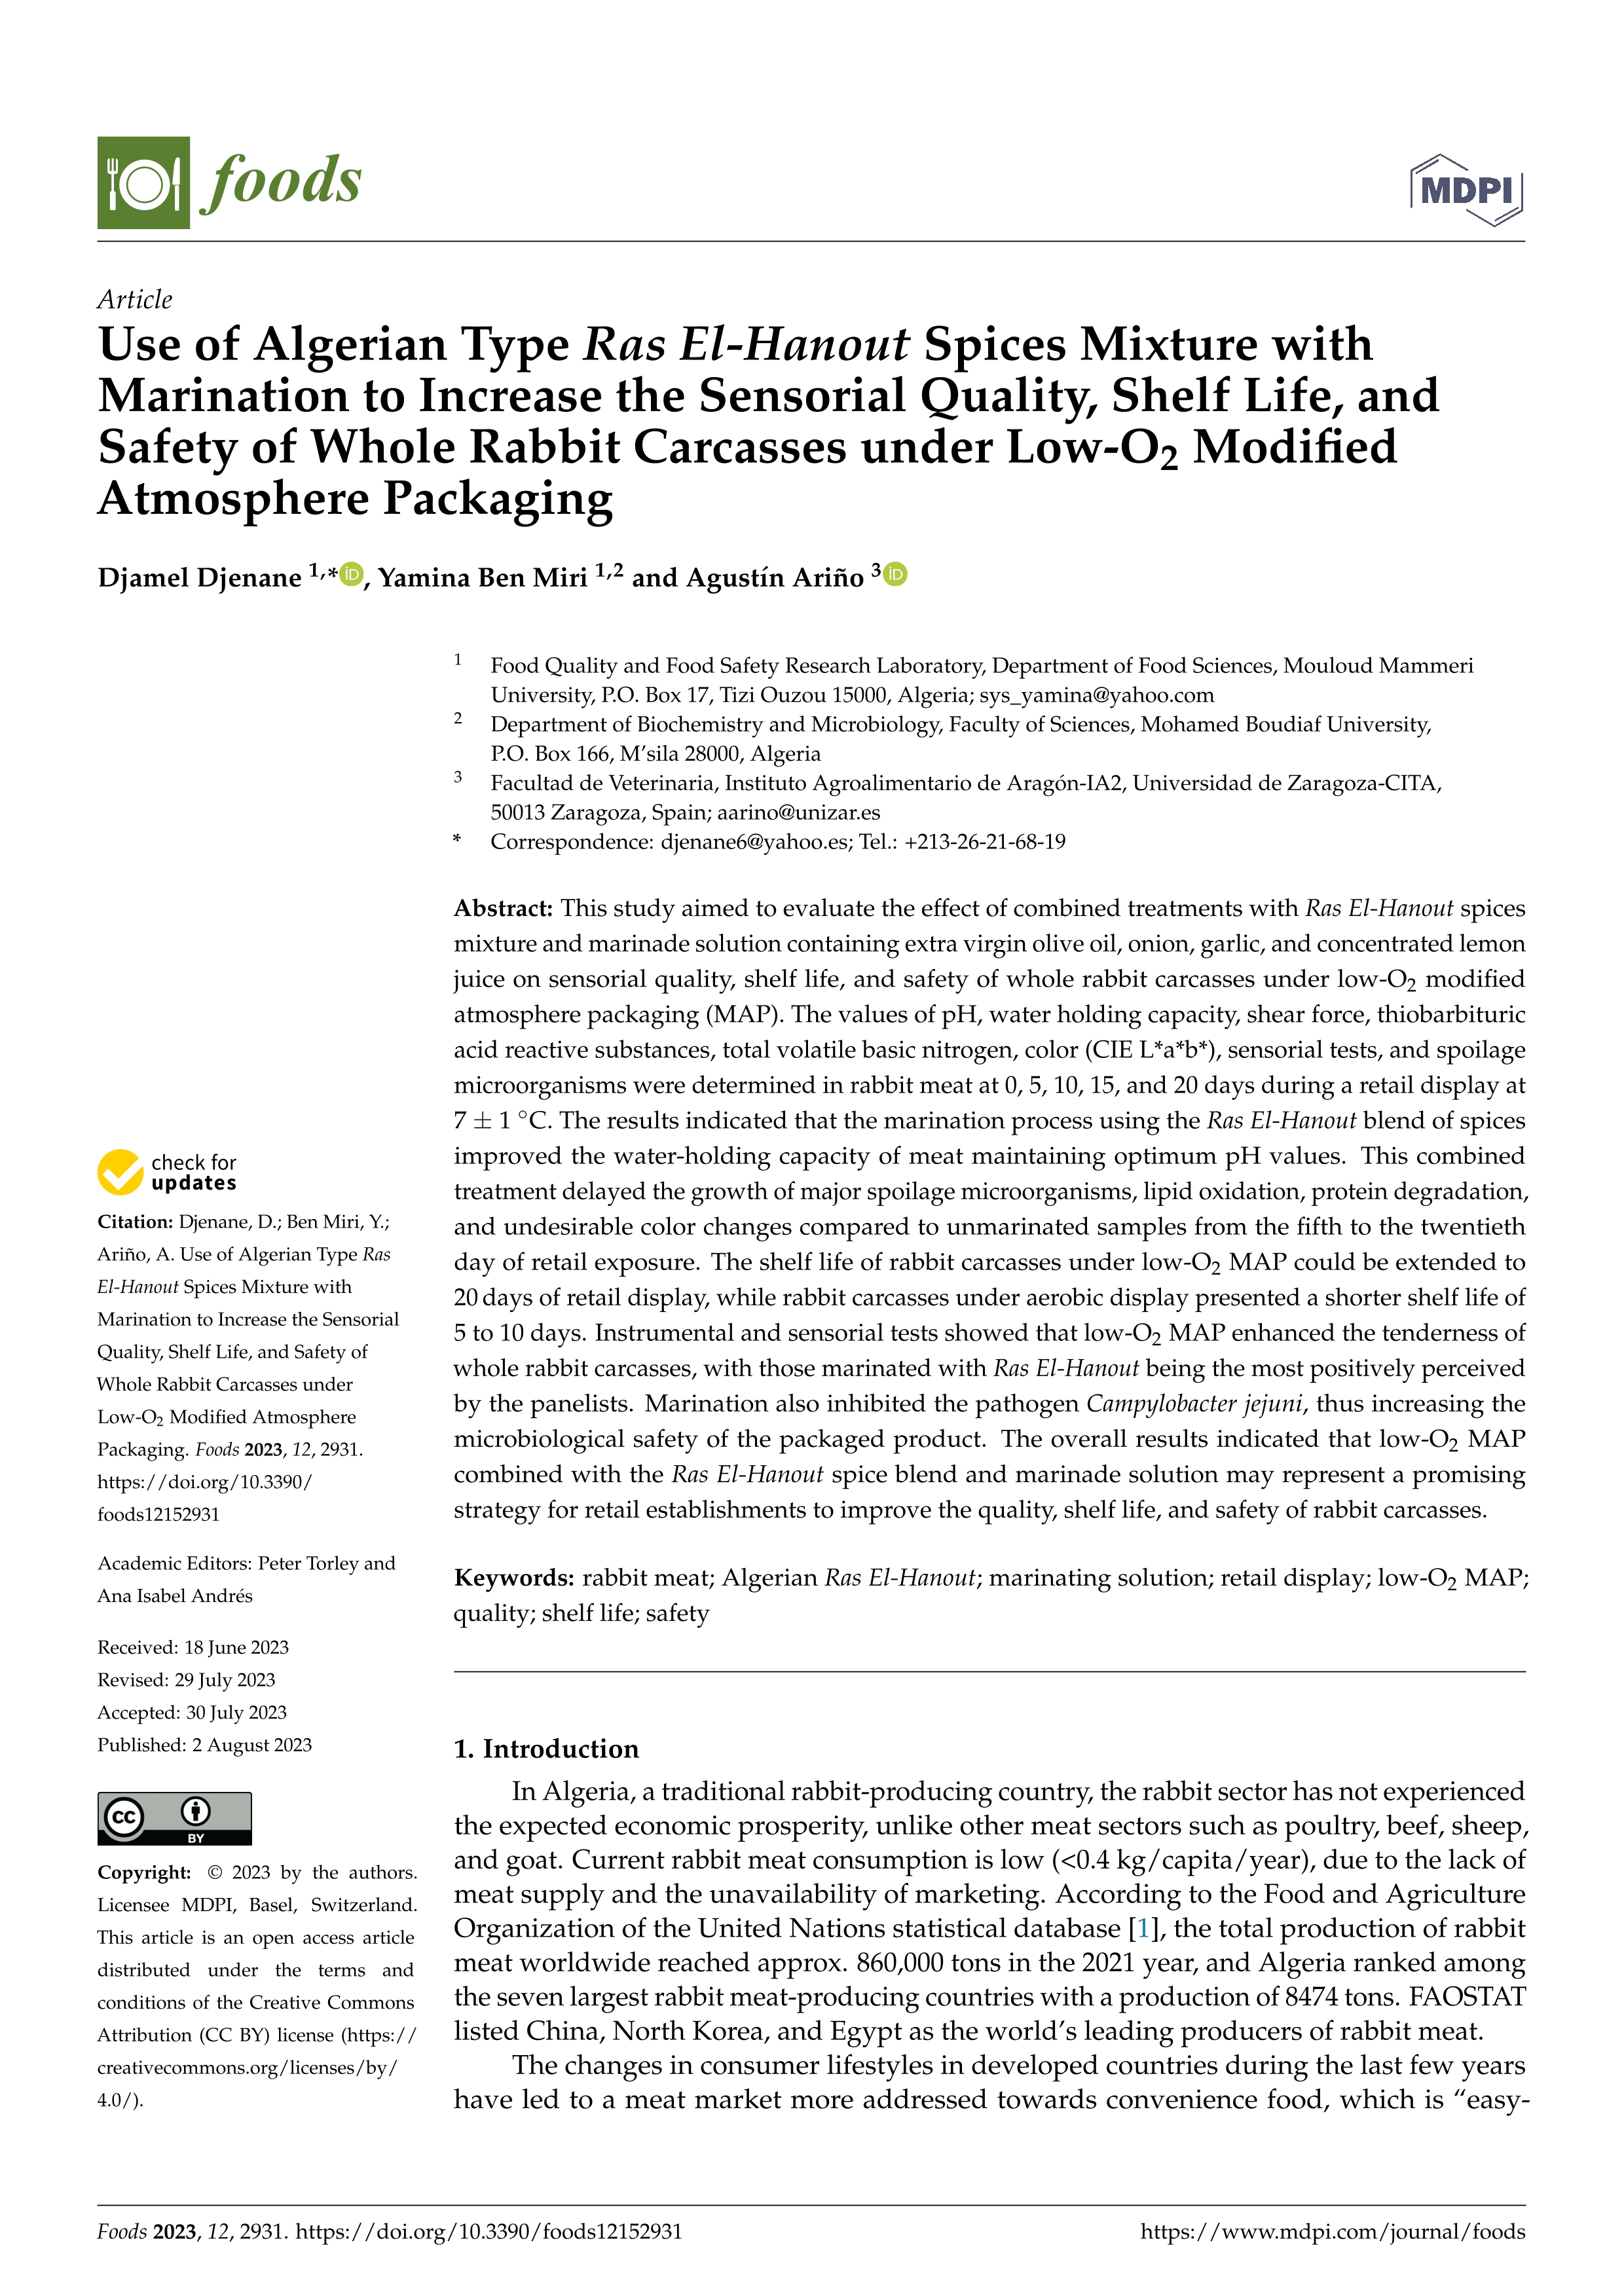 Use of Algerian type Ras El-Hanout spices mixture with marination to increase the sensorial quality, shelf life, and safety of whole rabbit carcasses under low-O2 modified atmosphere packaging